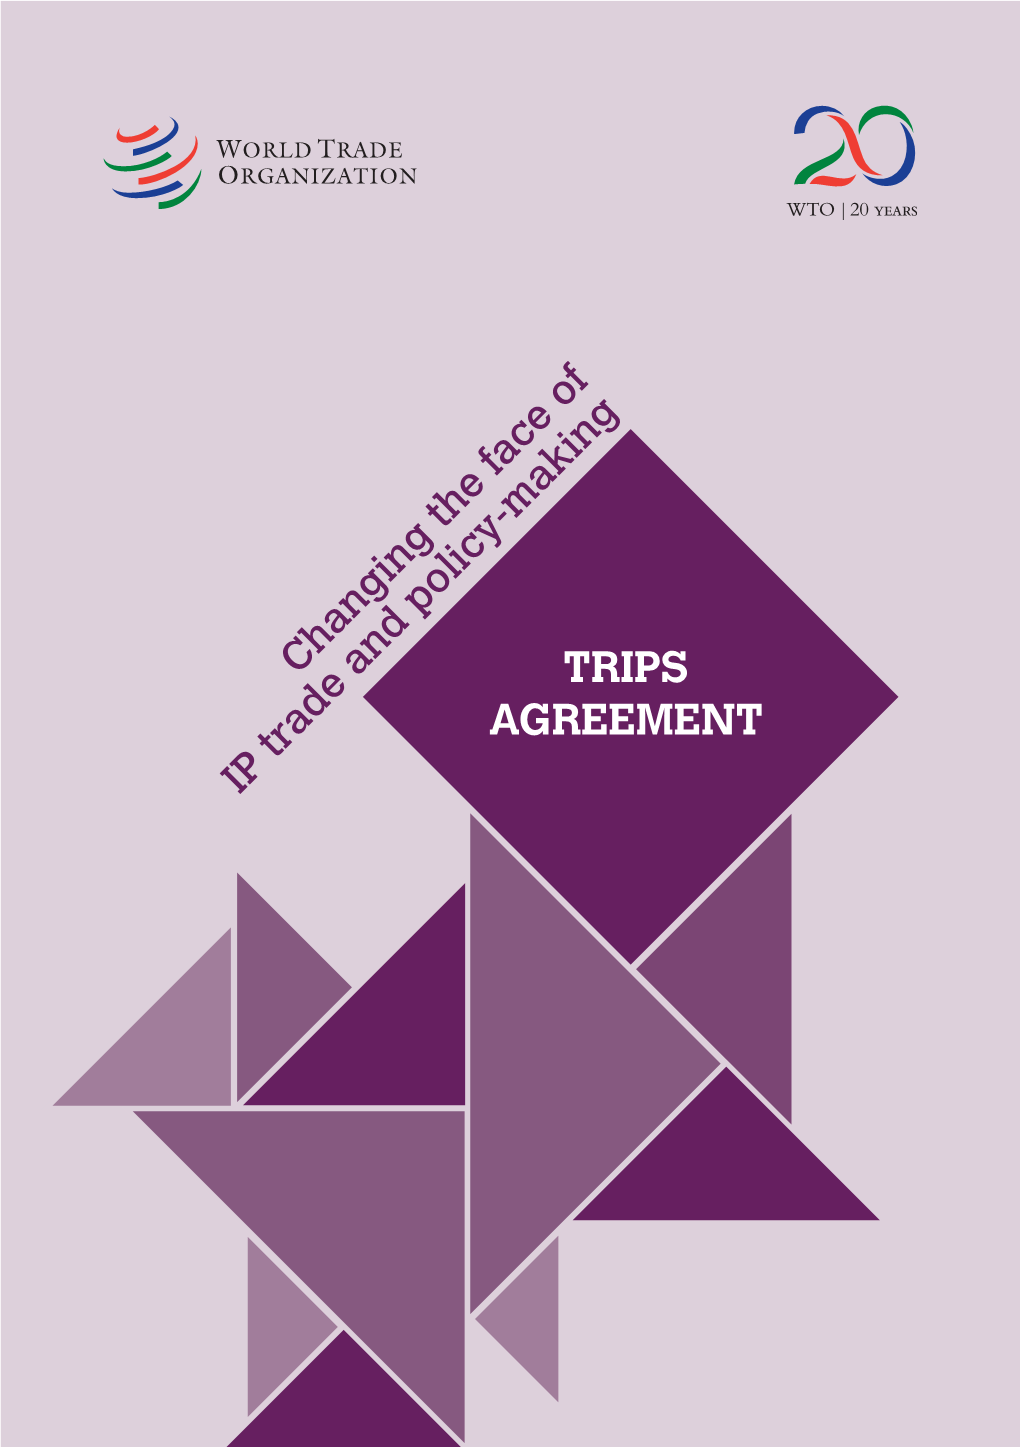 TRIPS Agreement Helps Ease Trade Tensions About IP Issues While Leaving WTO Members Ample Space to Pursue Diverse Domestic Policies